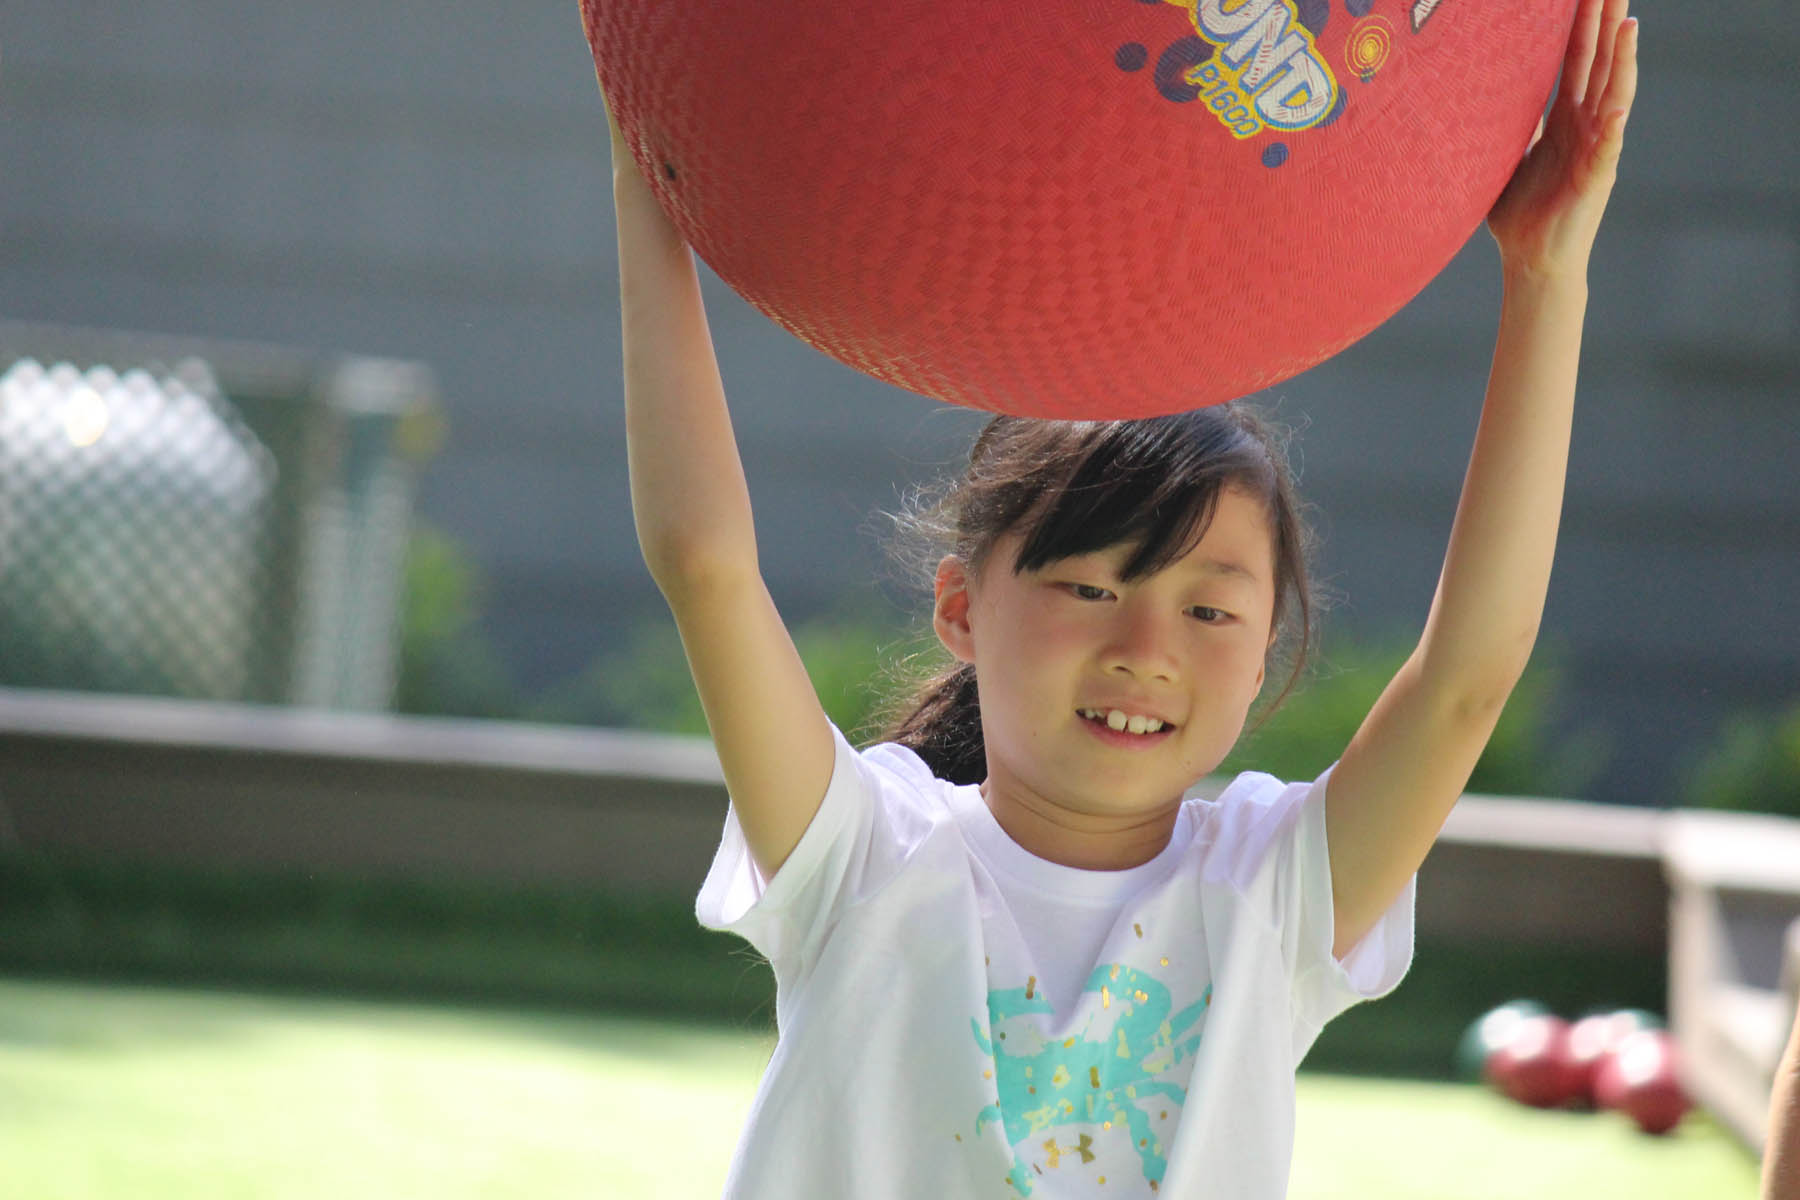 Young girl with a large bouncy ball on her head.